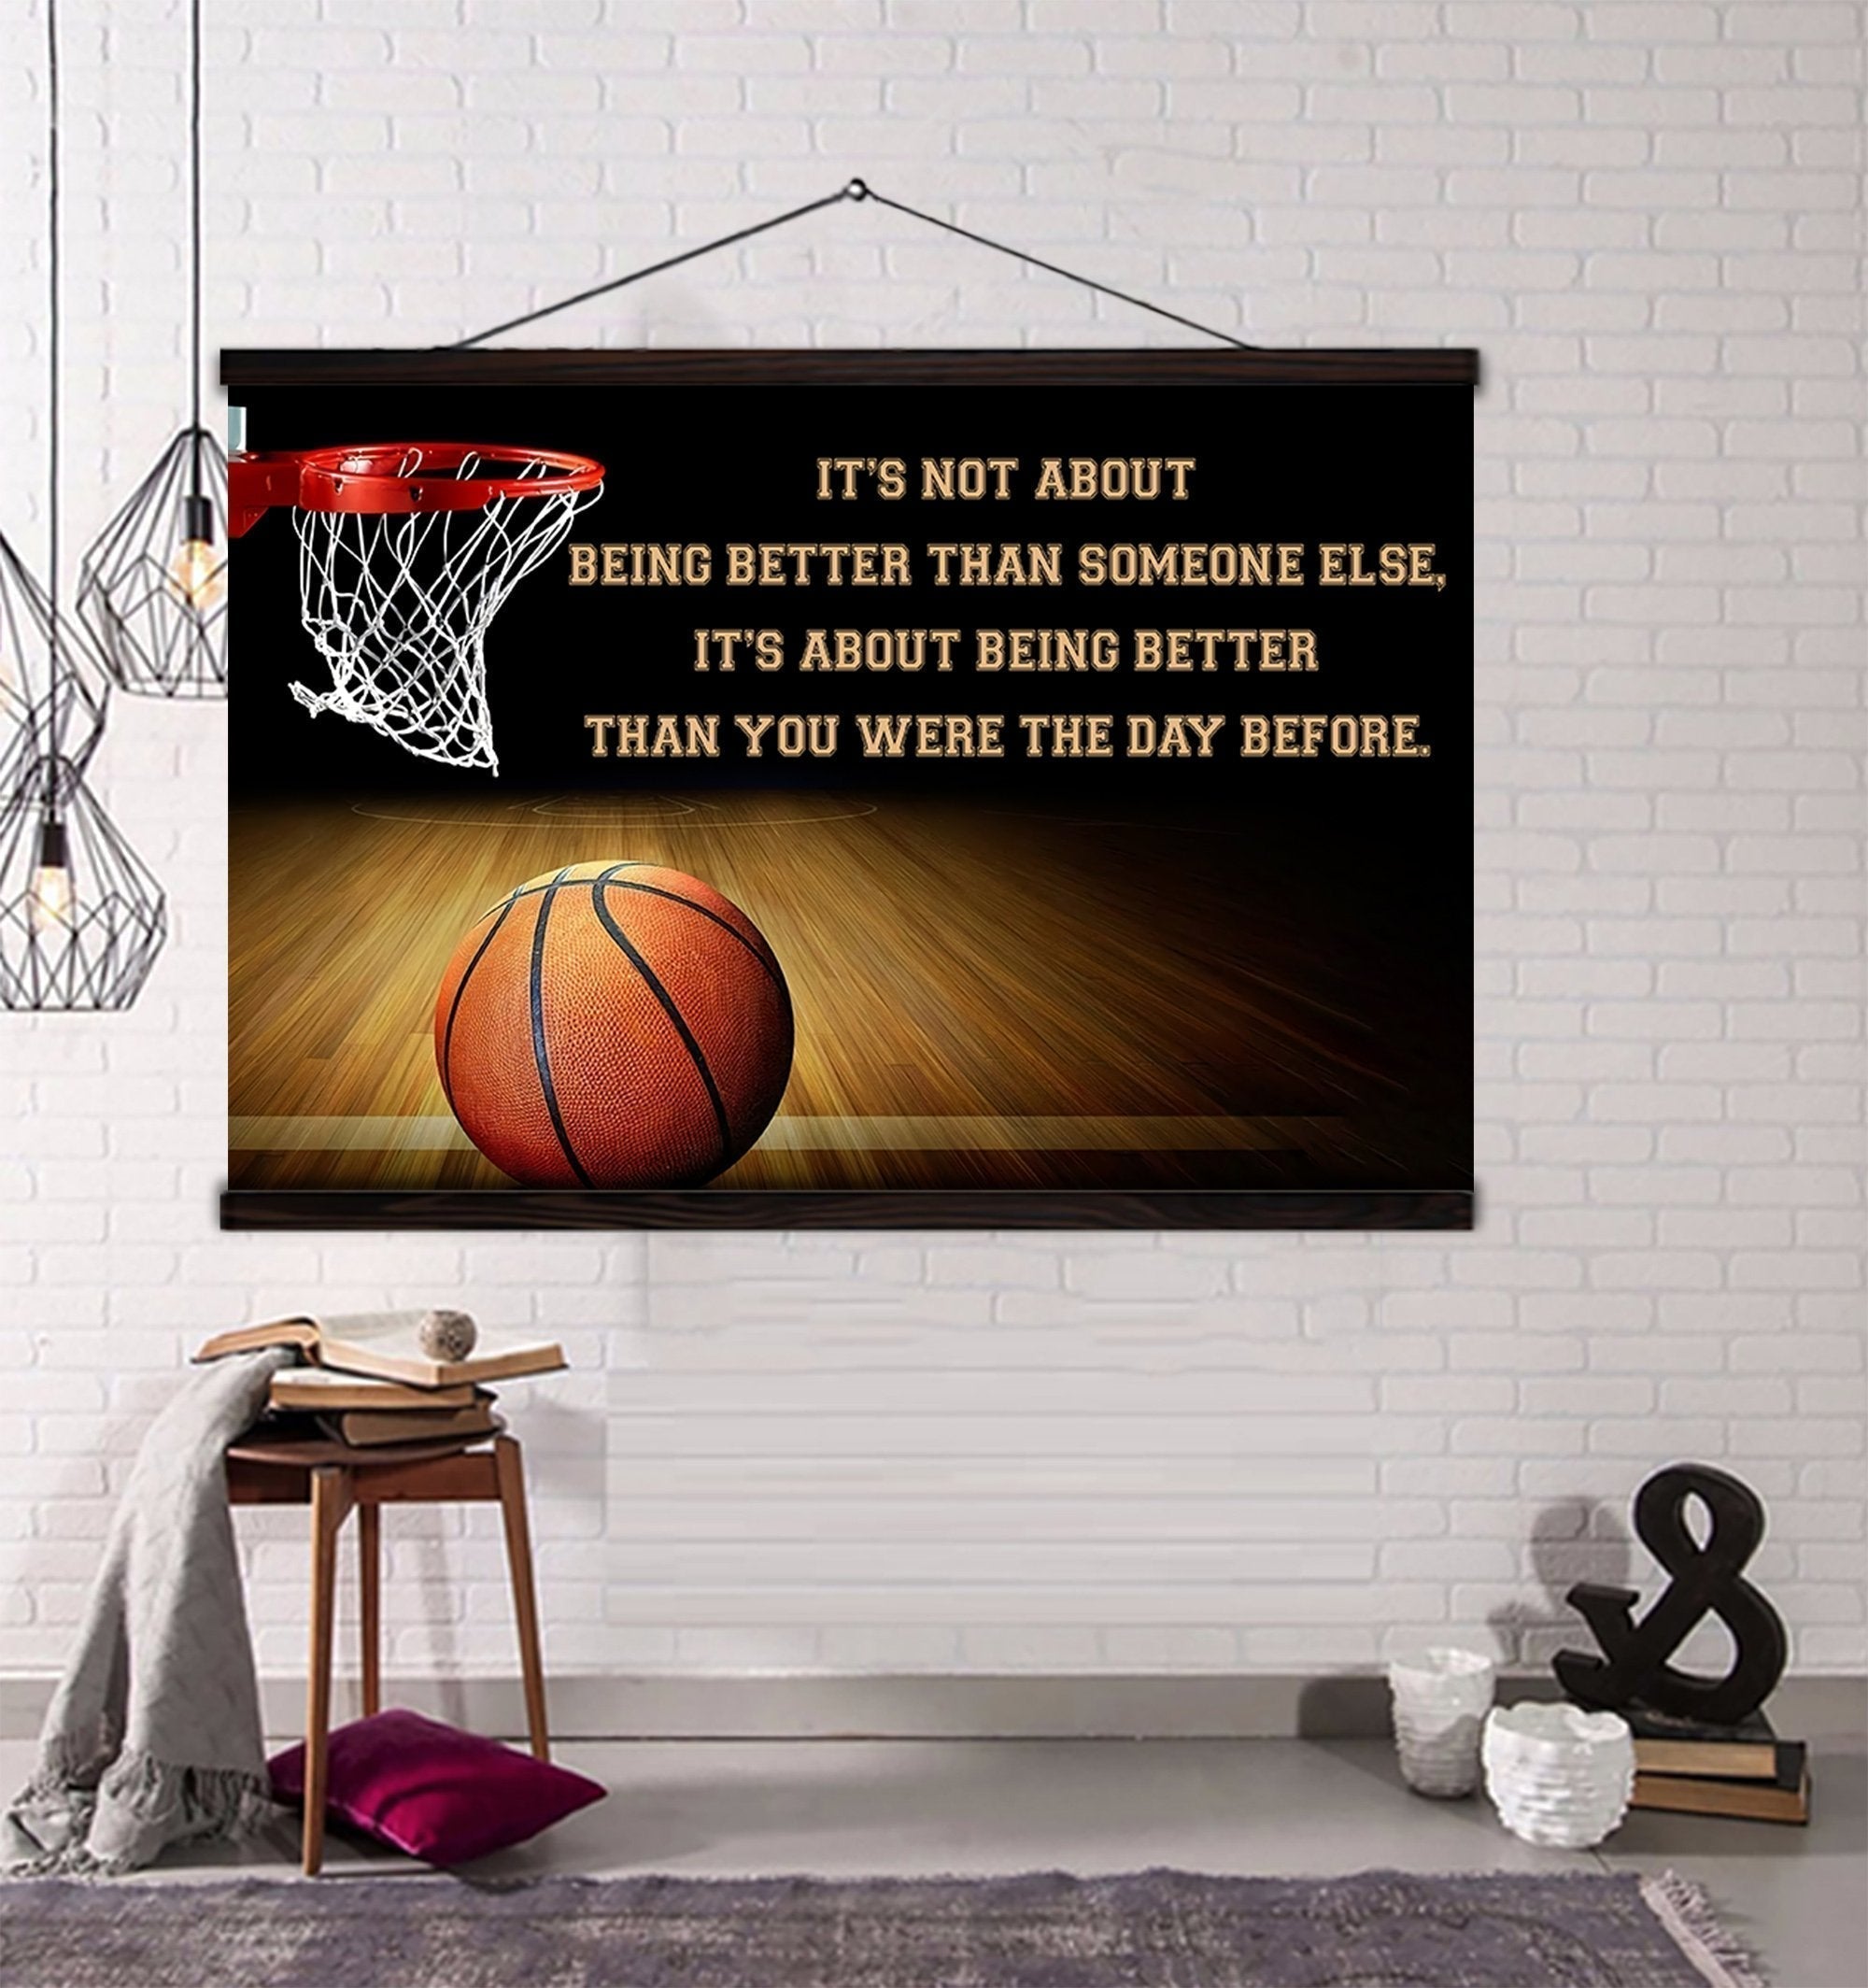 Racing customizable poster canvas - It is not about better than someone else, It is about being better than you were the day before